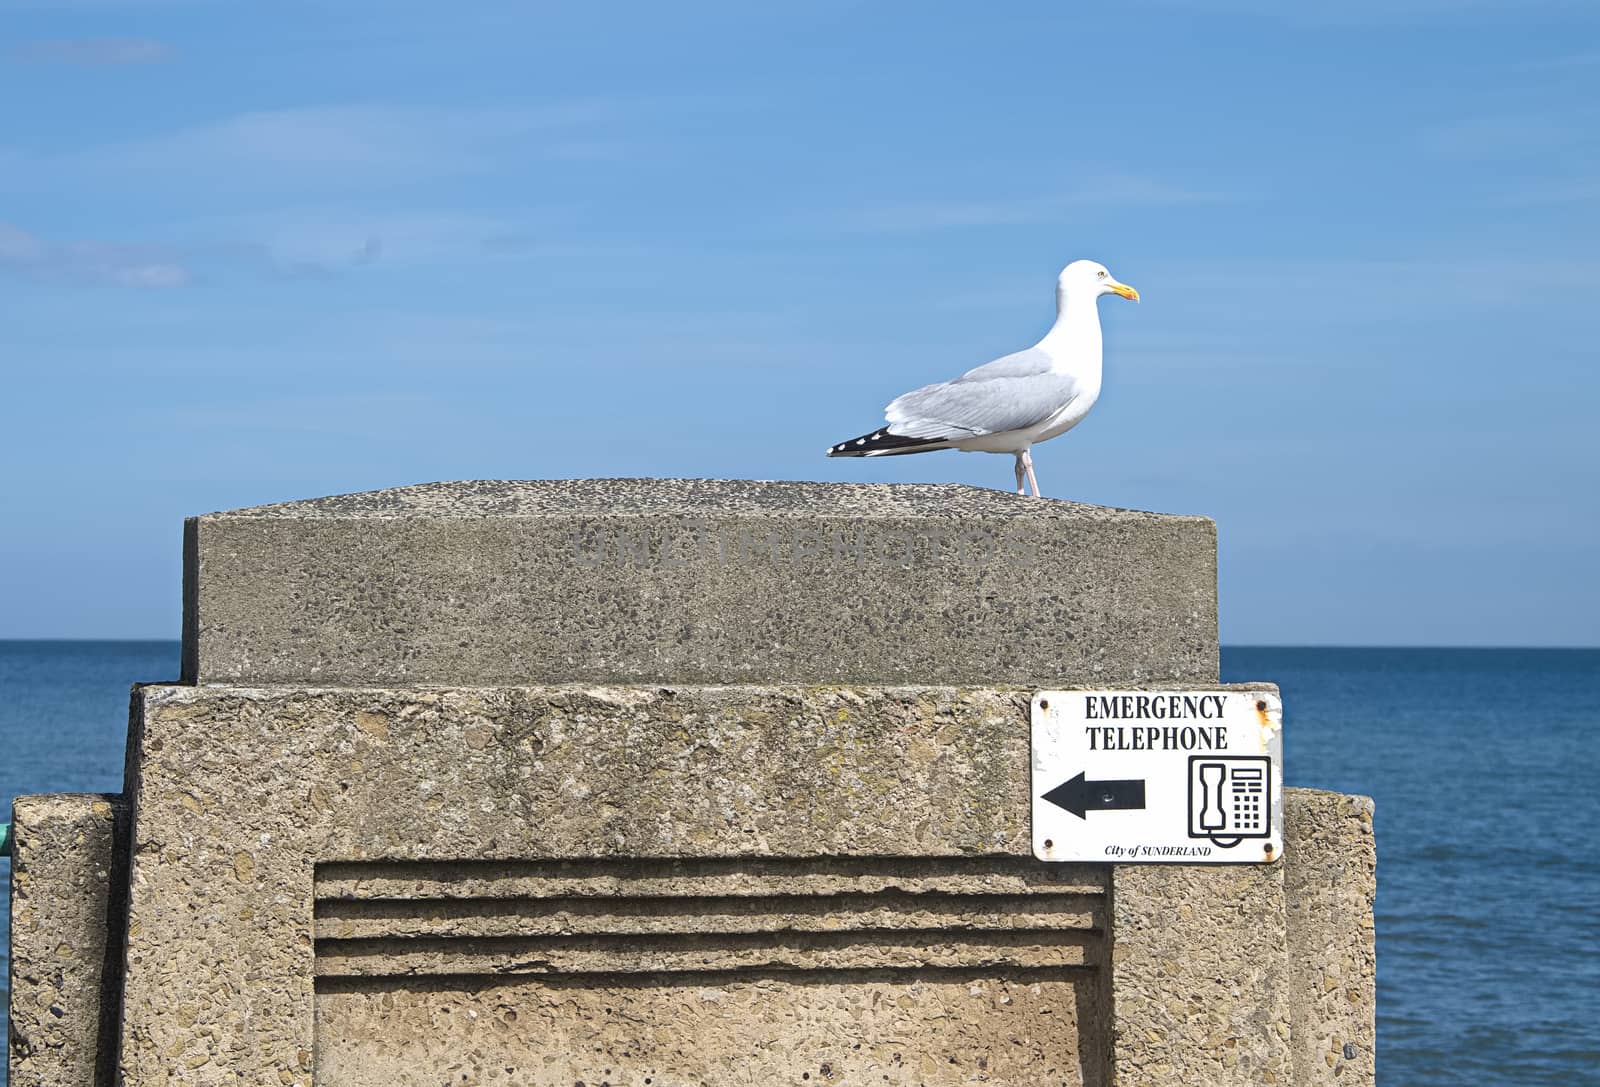 Seagull standing on concrete street furniture